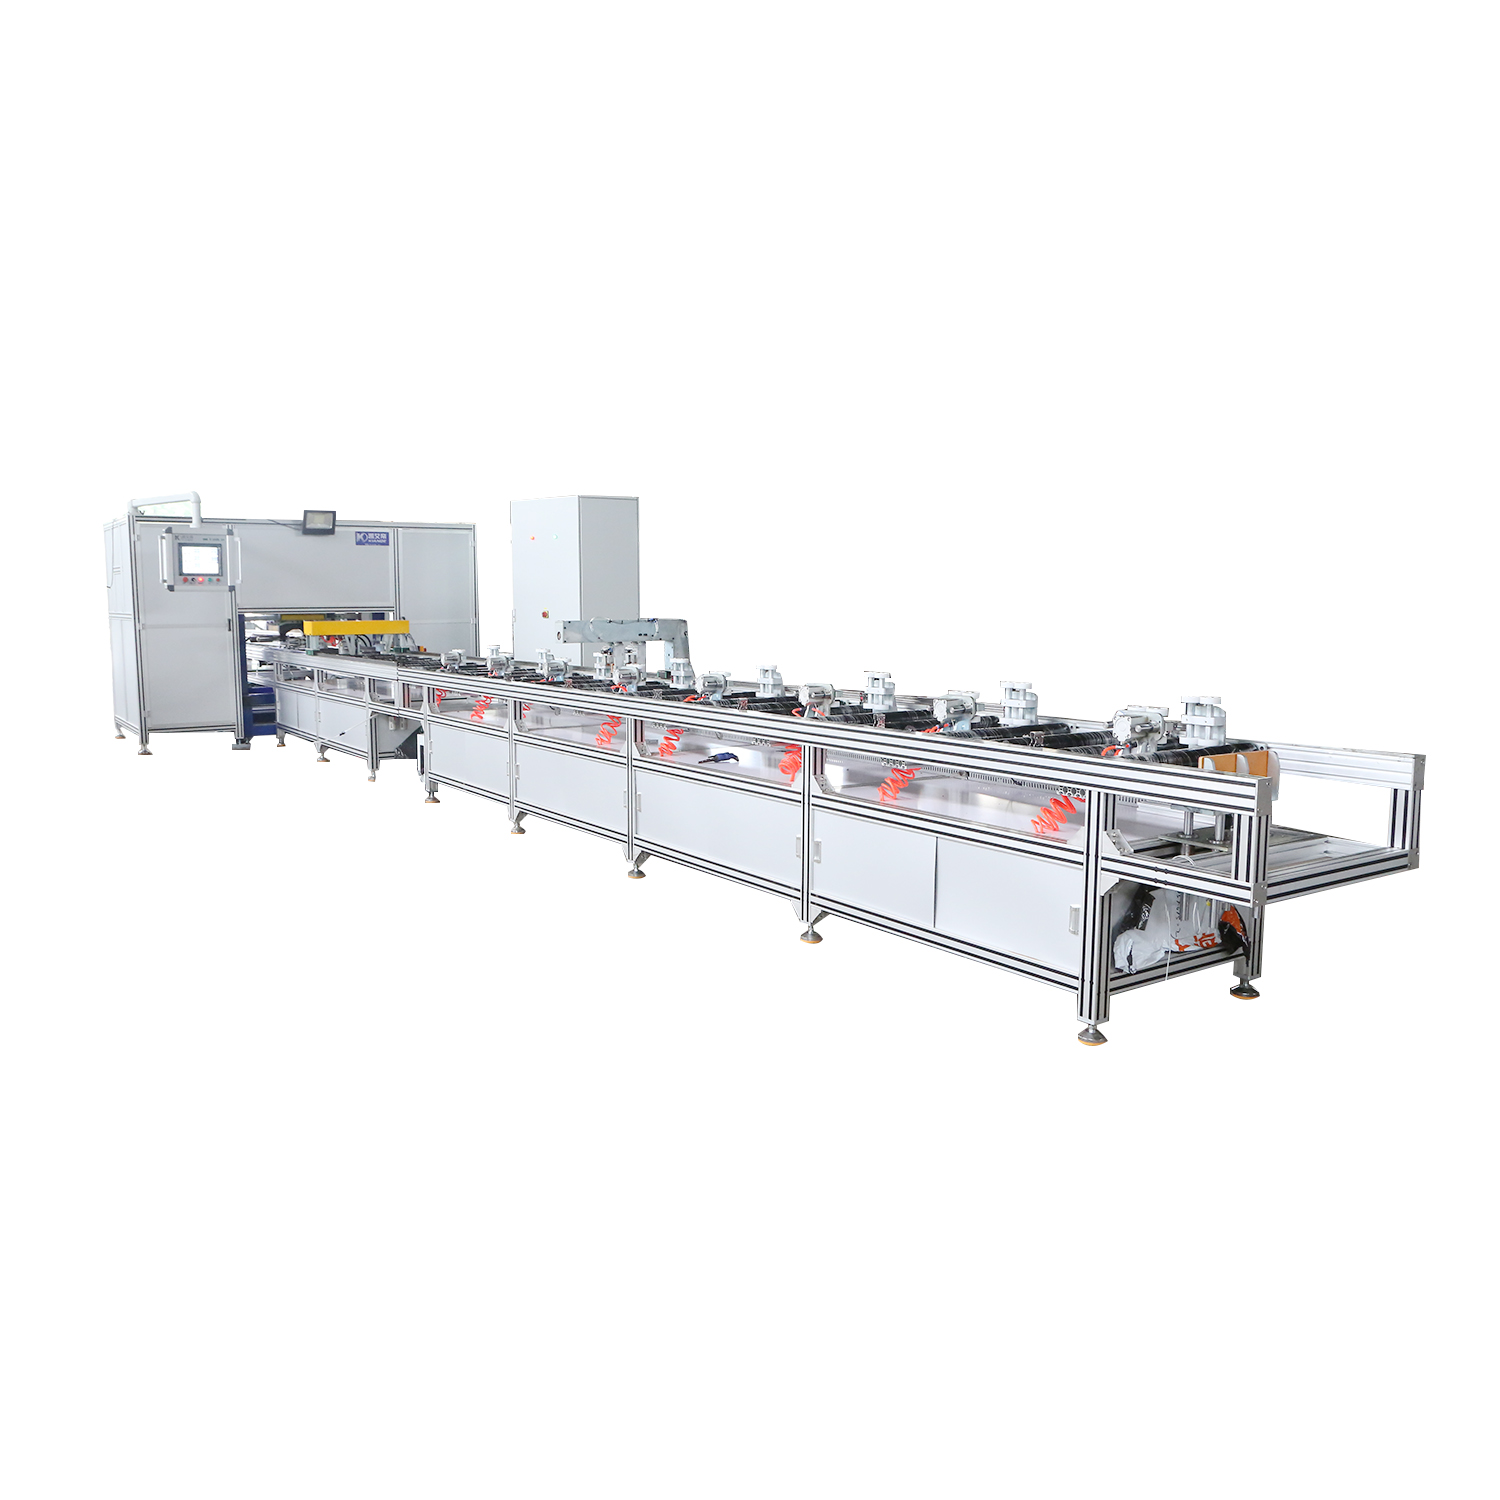 Automatic busway fabrication machine for assembly of sandwich busduct system